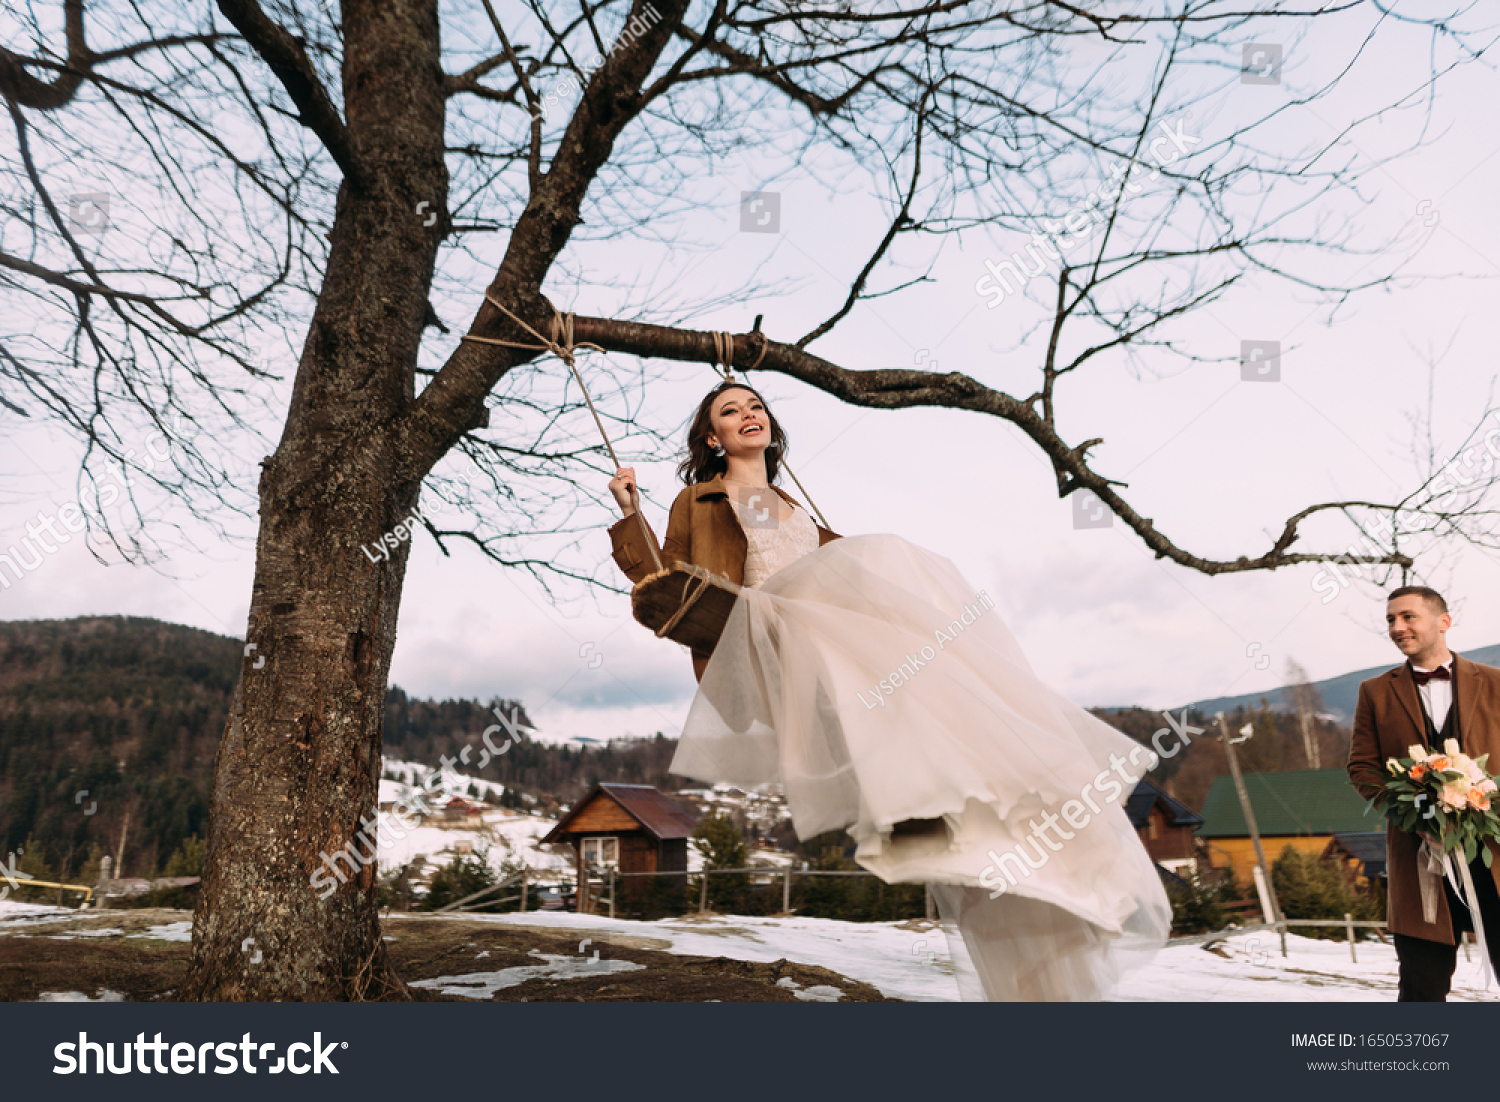 a cheerful and cheerful bride sways on a swing, laughs merrily and enjoys life. Stylish couple in love. #1650537067